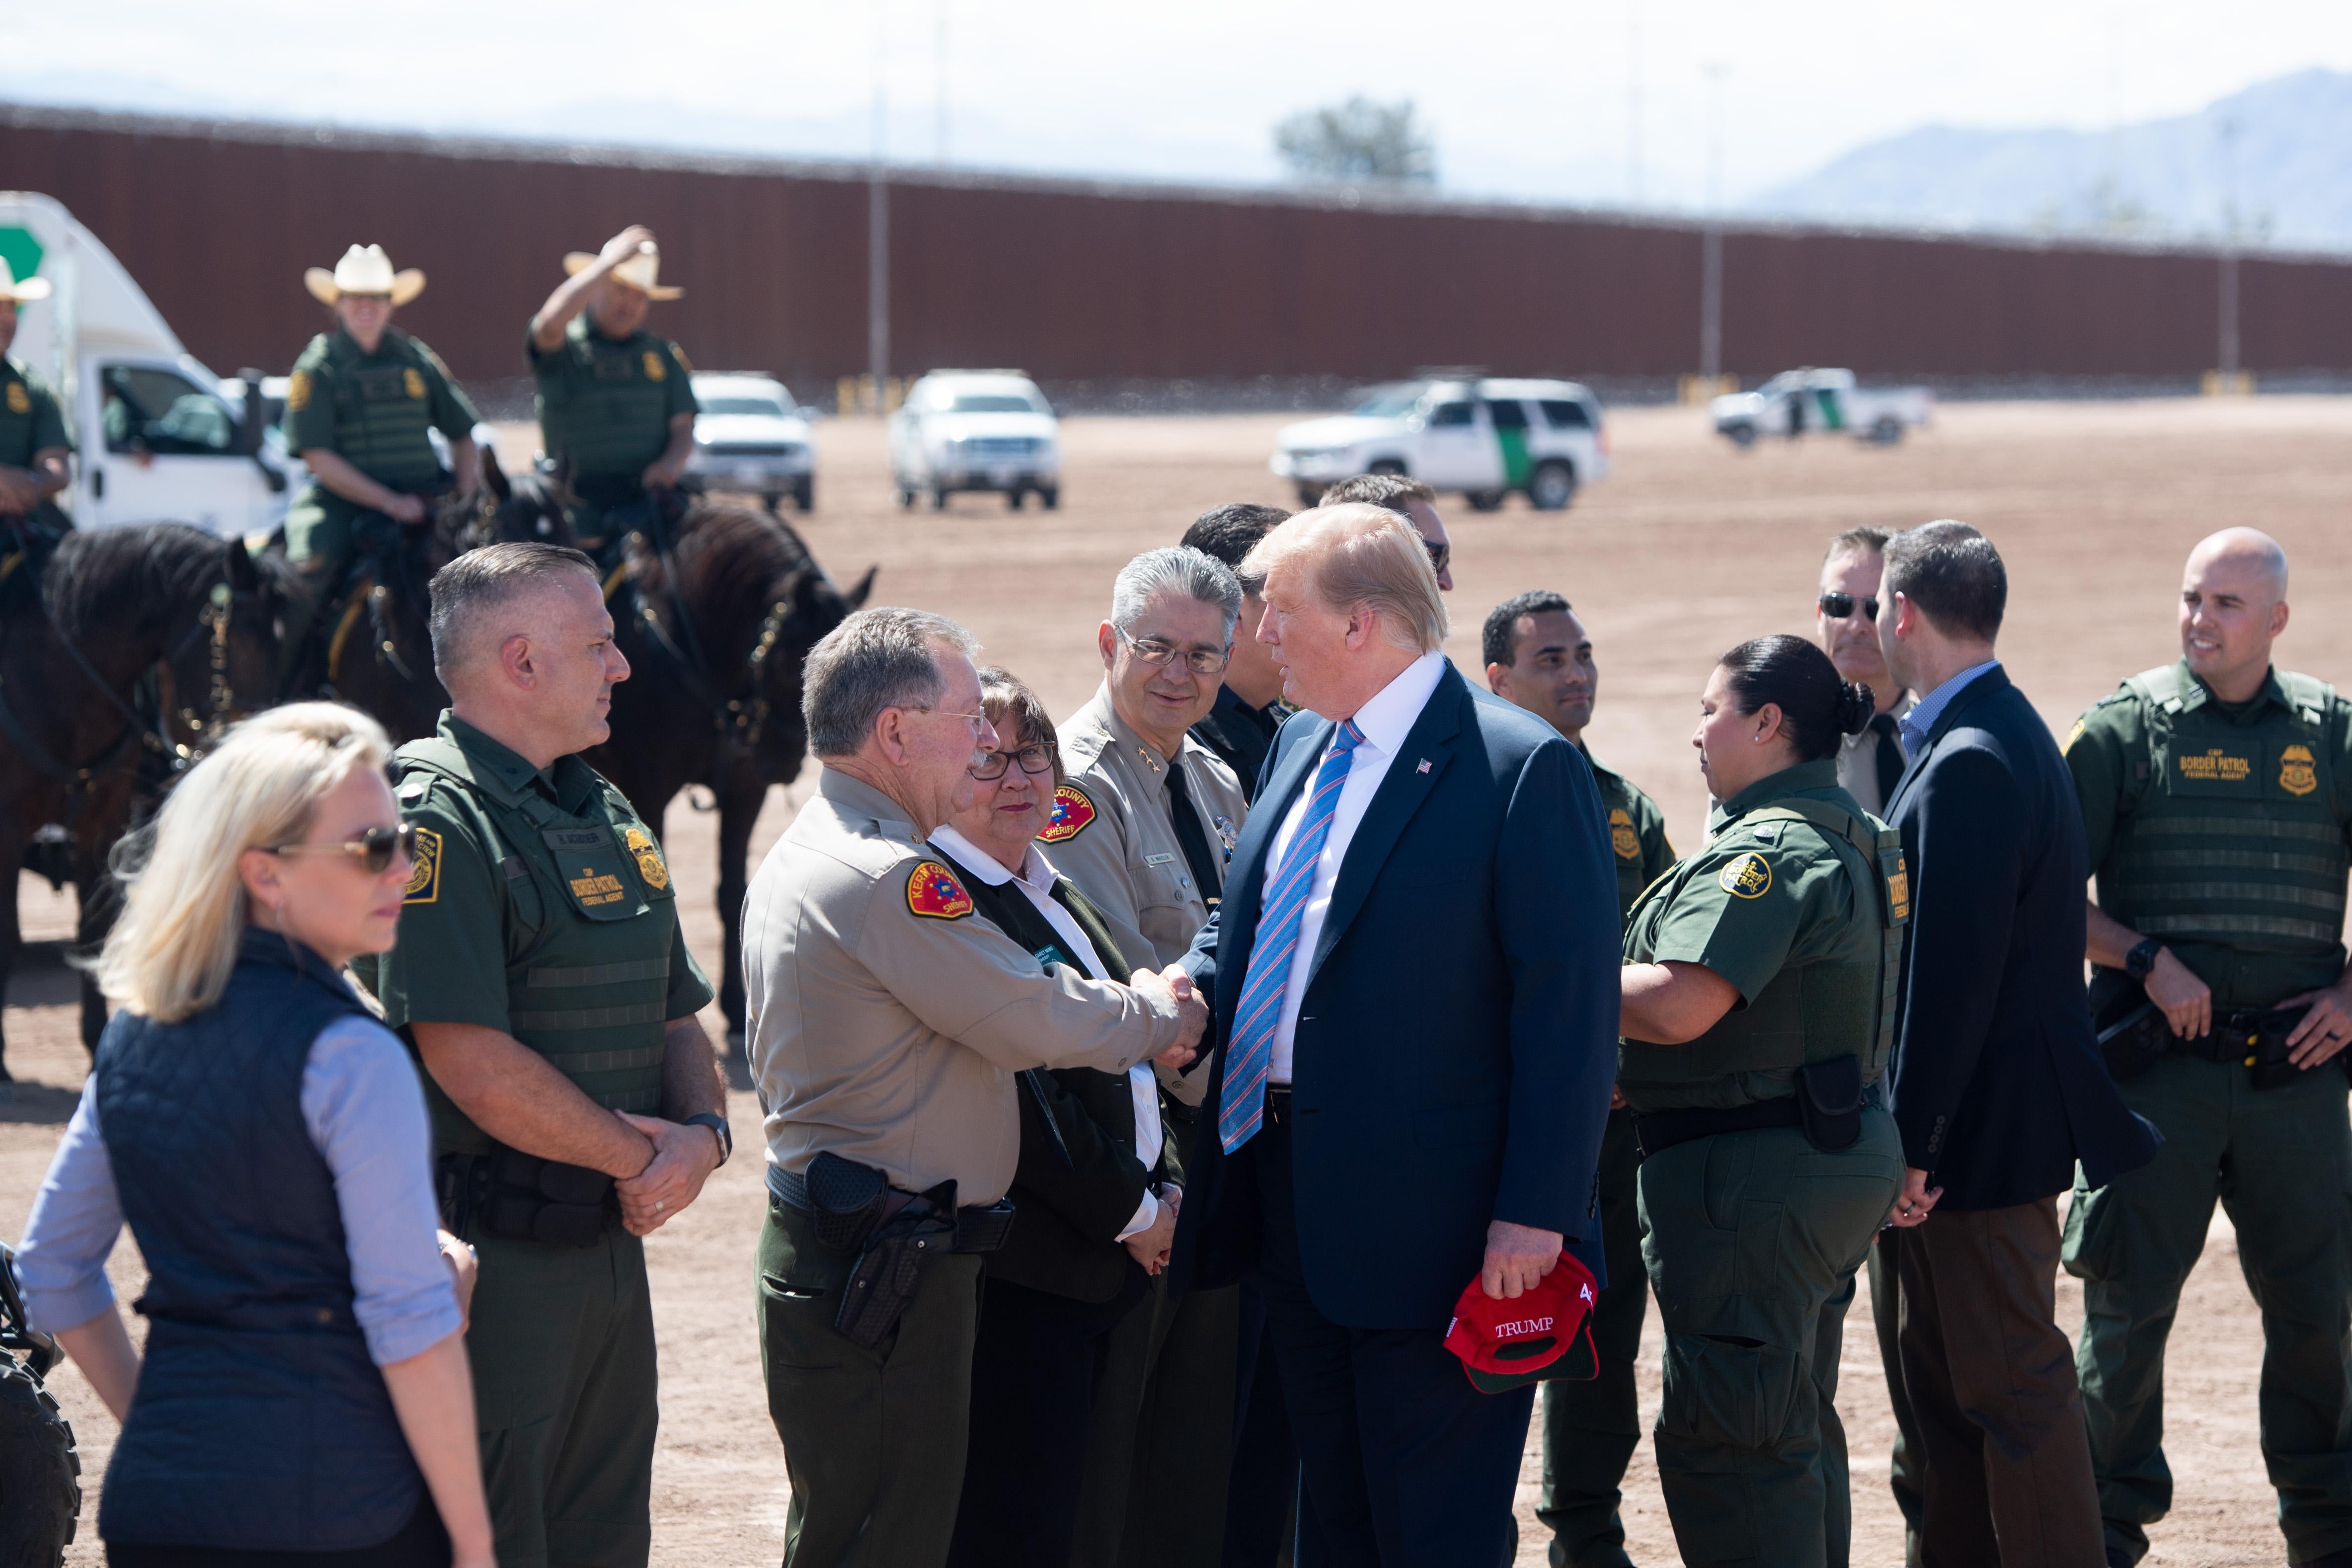 President Donald Trump tours the border wall between the United States and Mexico in Calexico, California on April 5, 2019.